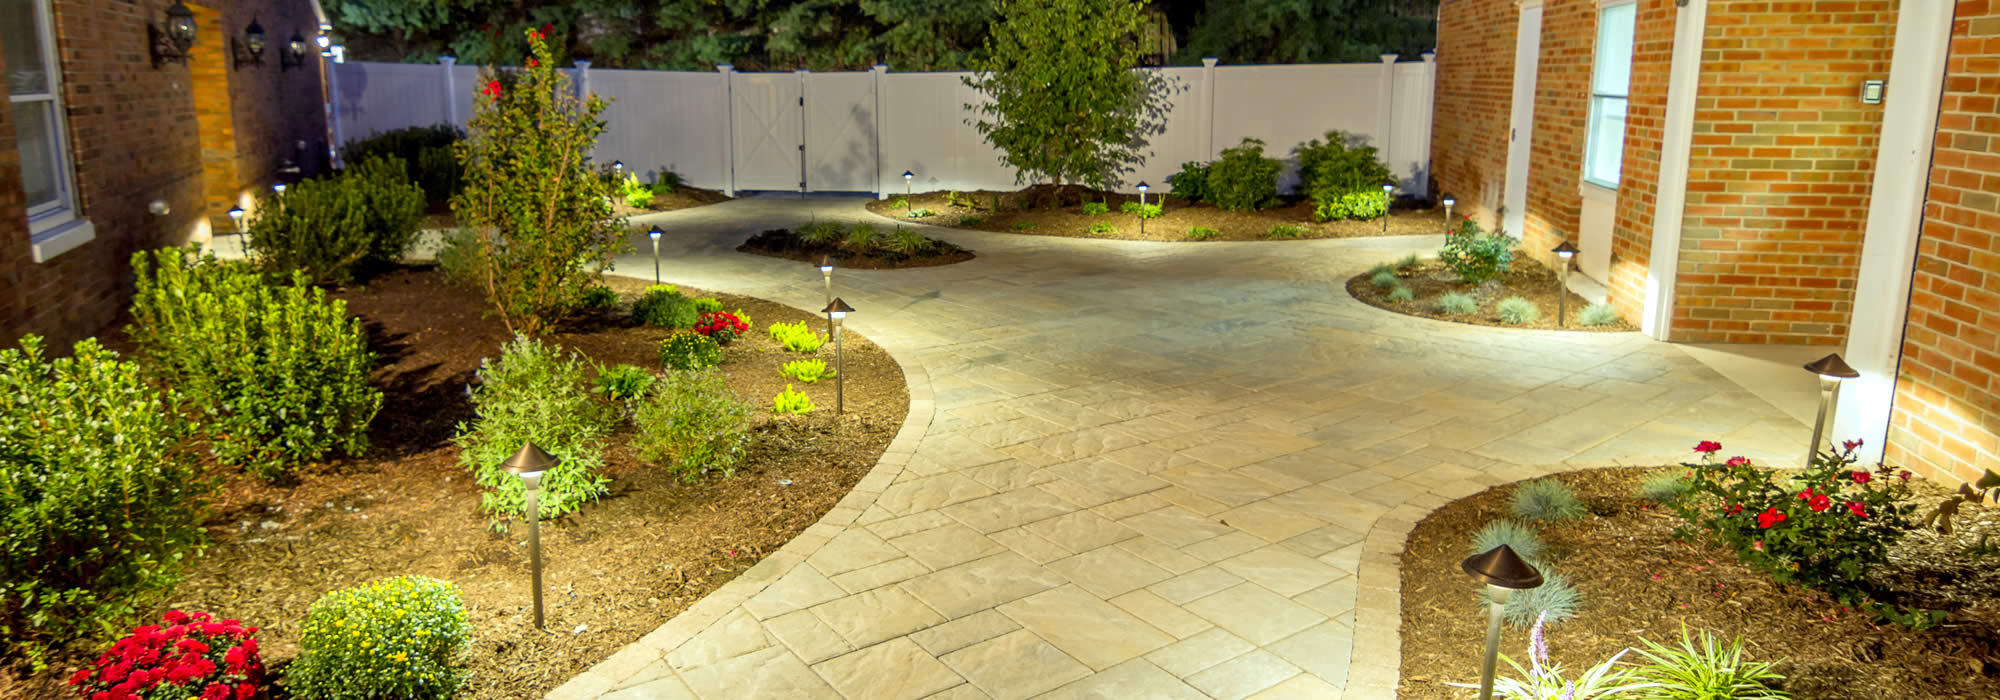 Landscaping Services in Stoughton